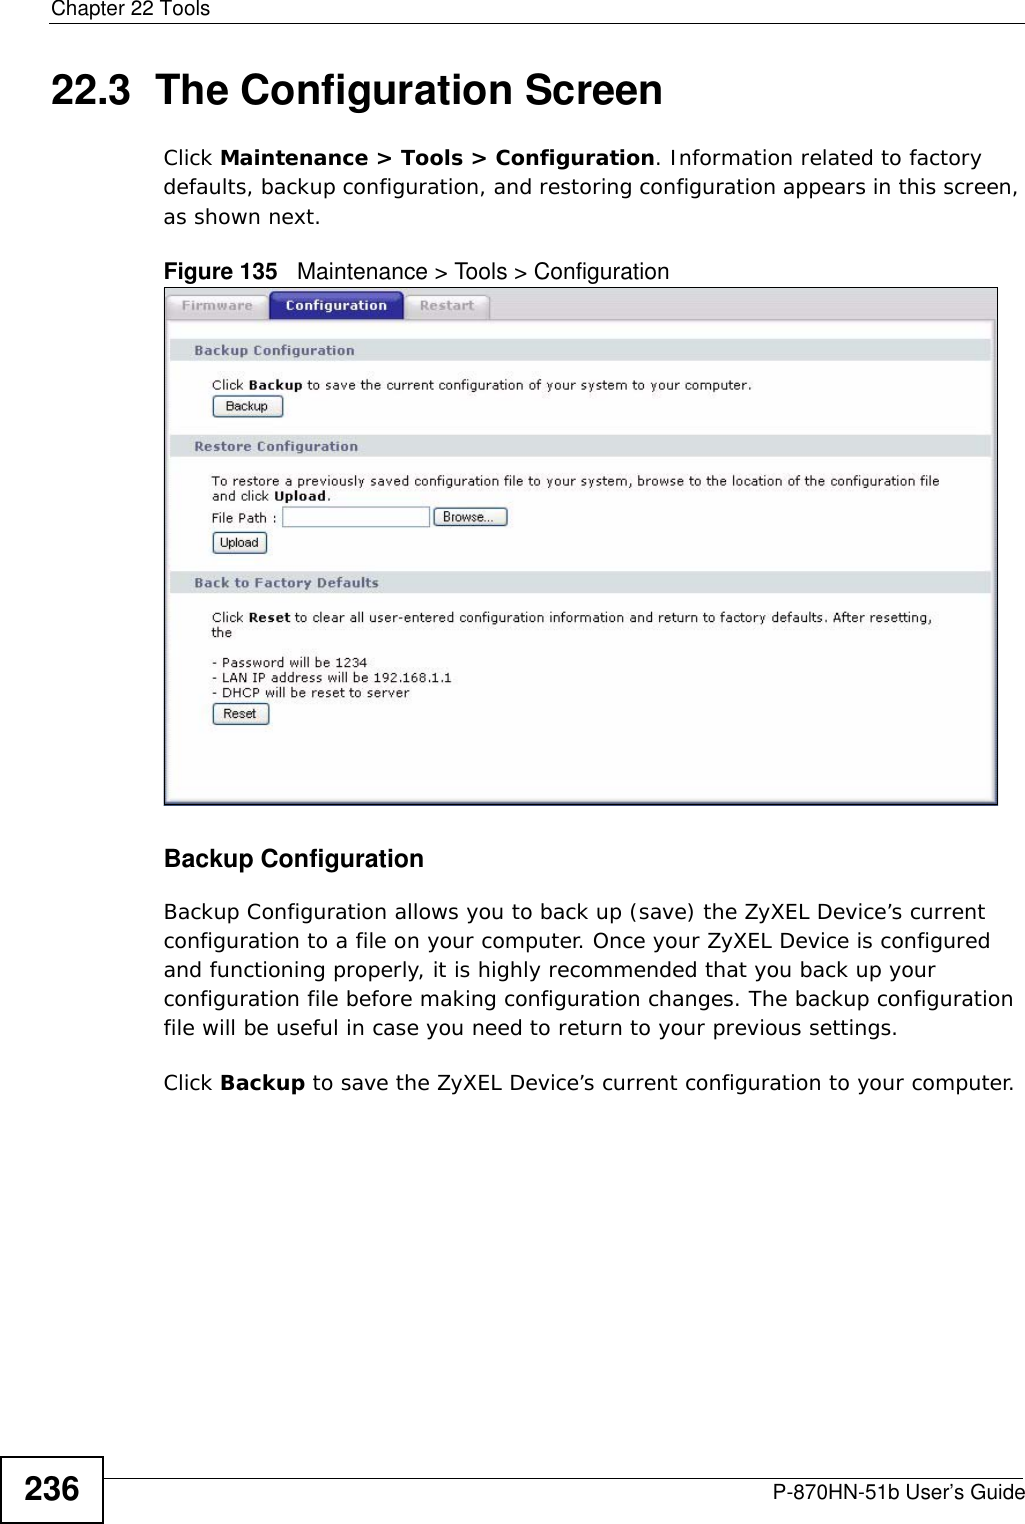 Chapter 22 ToolsP-870HN-51b User’s Guide23622.3  The Configuration Screen Click Maintenance &gt; Tools &gt; Configuration. Information related to factory defaults, backup configuration, and restoring configuration appears in this screen, as shown next.Figure 135   Maintenance &gt; Tools &gt; ConfigurationBackup Configuration Backup Configuration allows you to back up (save) the ZyXEL Device’s current configuration to a file on your computer. Once your ZyXEL Device is configured and functioning properly, it is highly recommended that you back up your configuration file before making configuration changes. The backup configuration file will be useful in case you need to return to your previous settings. Click Backup to save the ZyXEL Device’s current configuration to your computer.